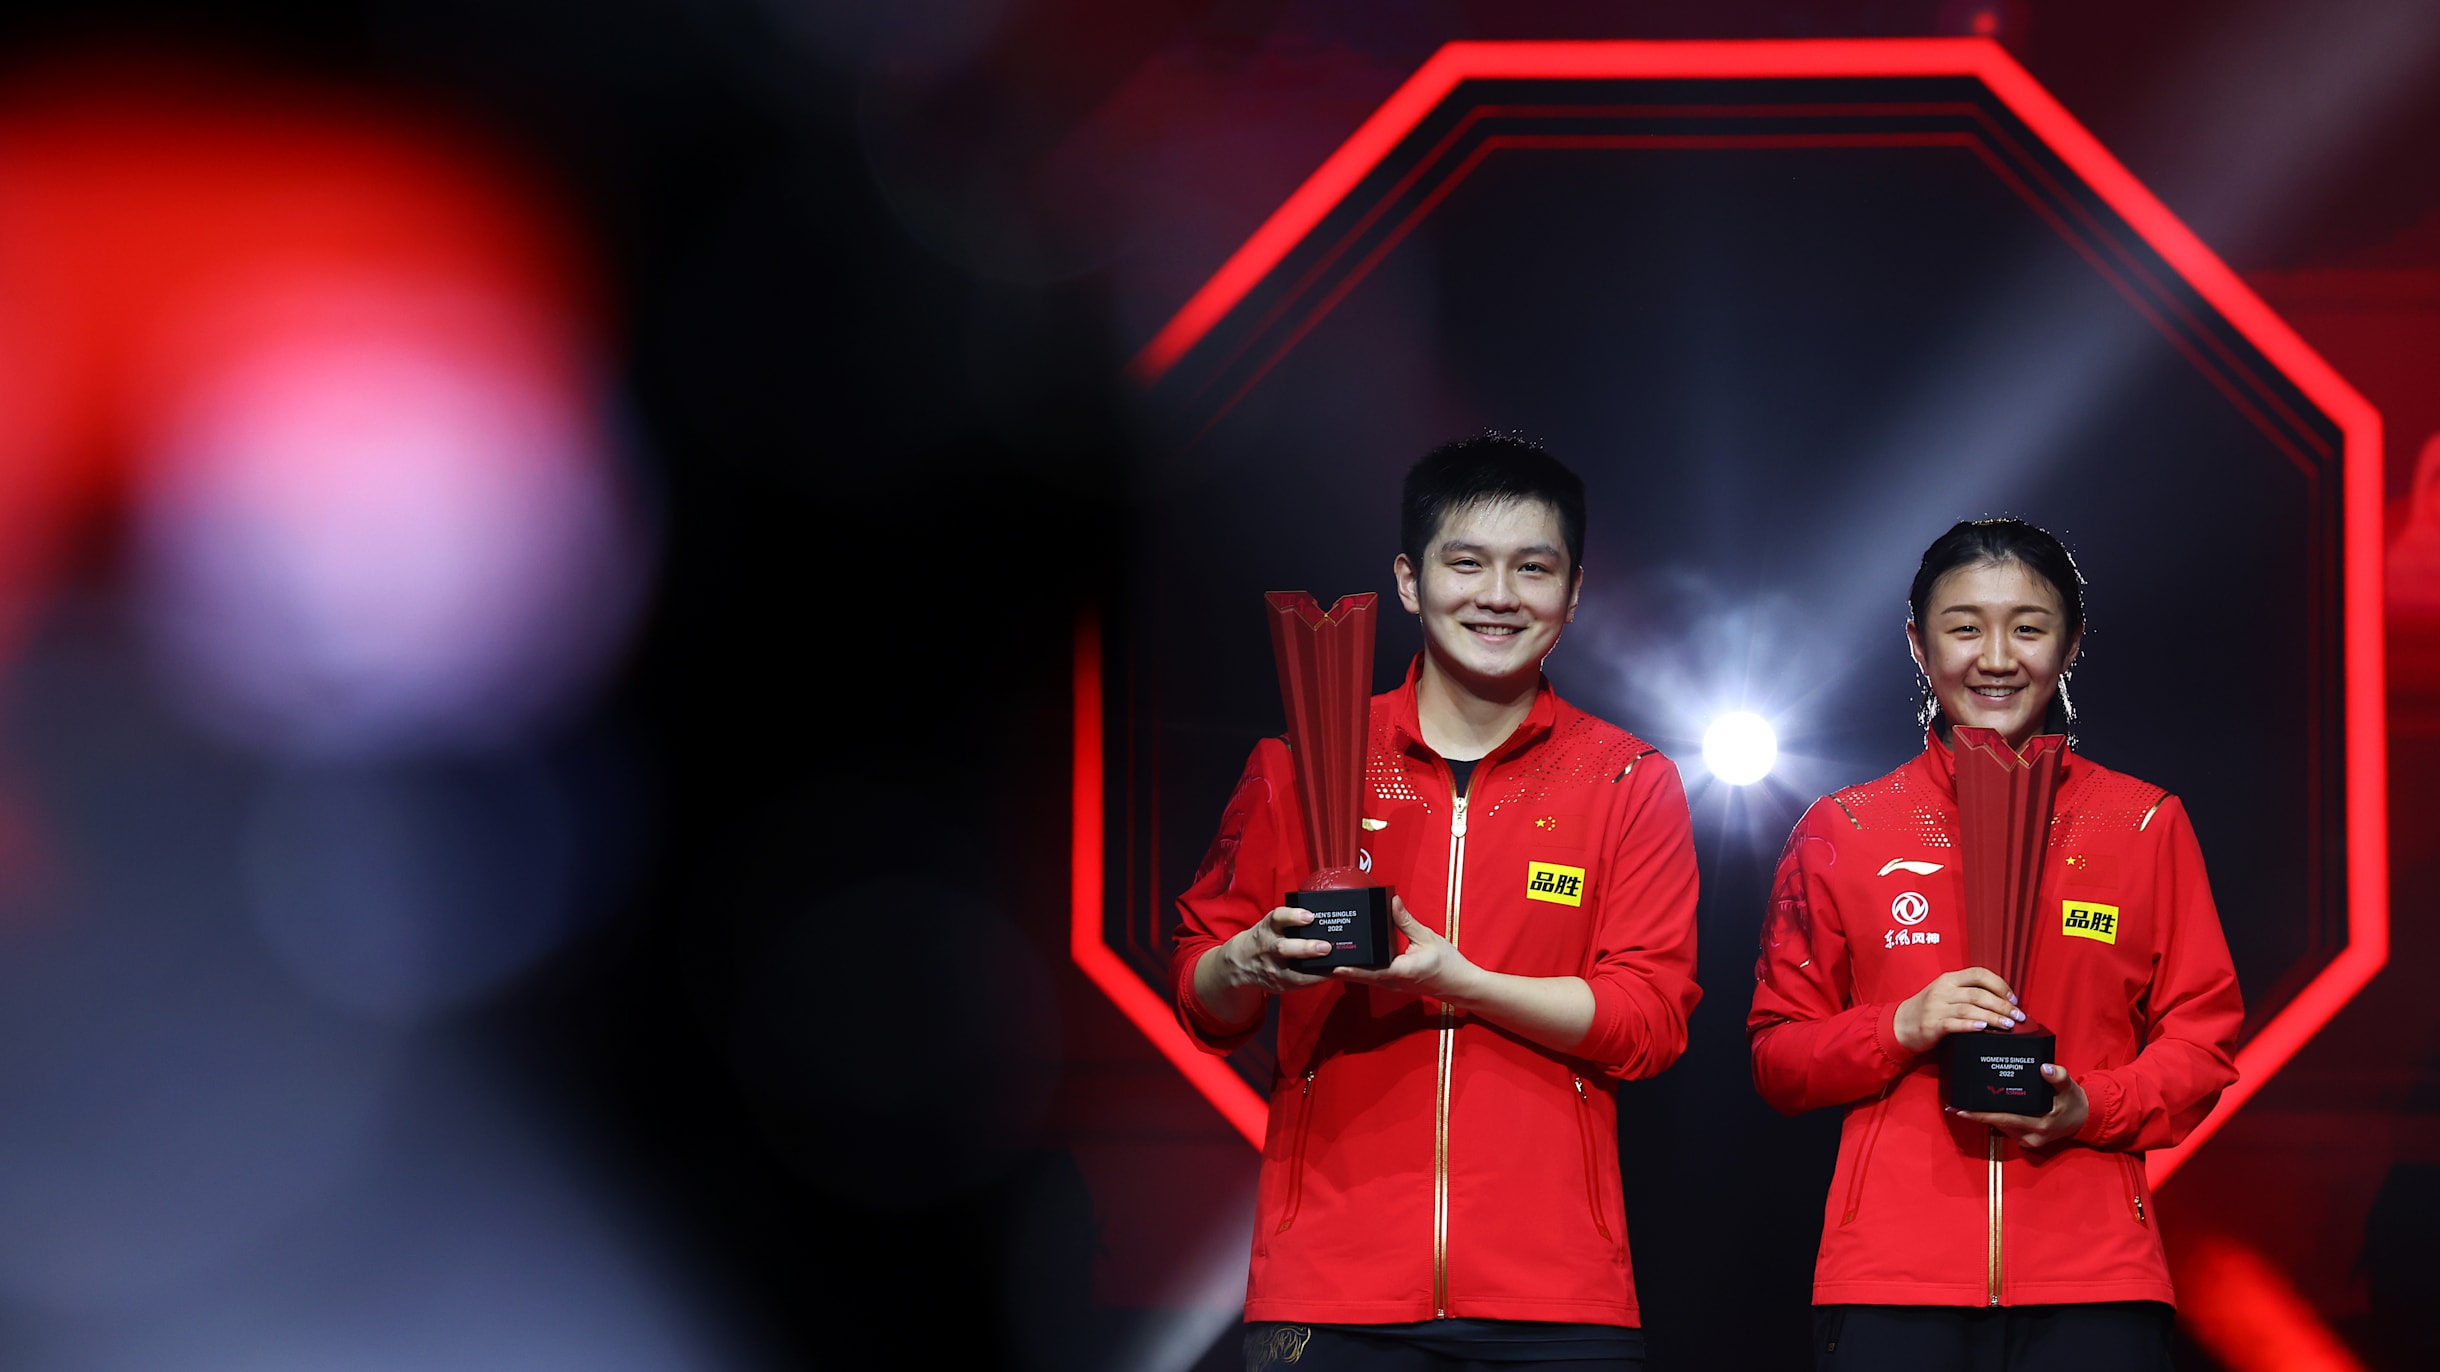 WTT Singapore Smash 2023 main draw preview Full schedule and how to watch live